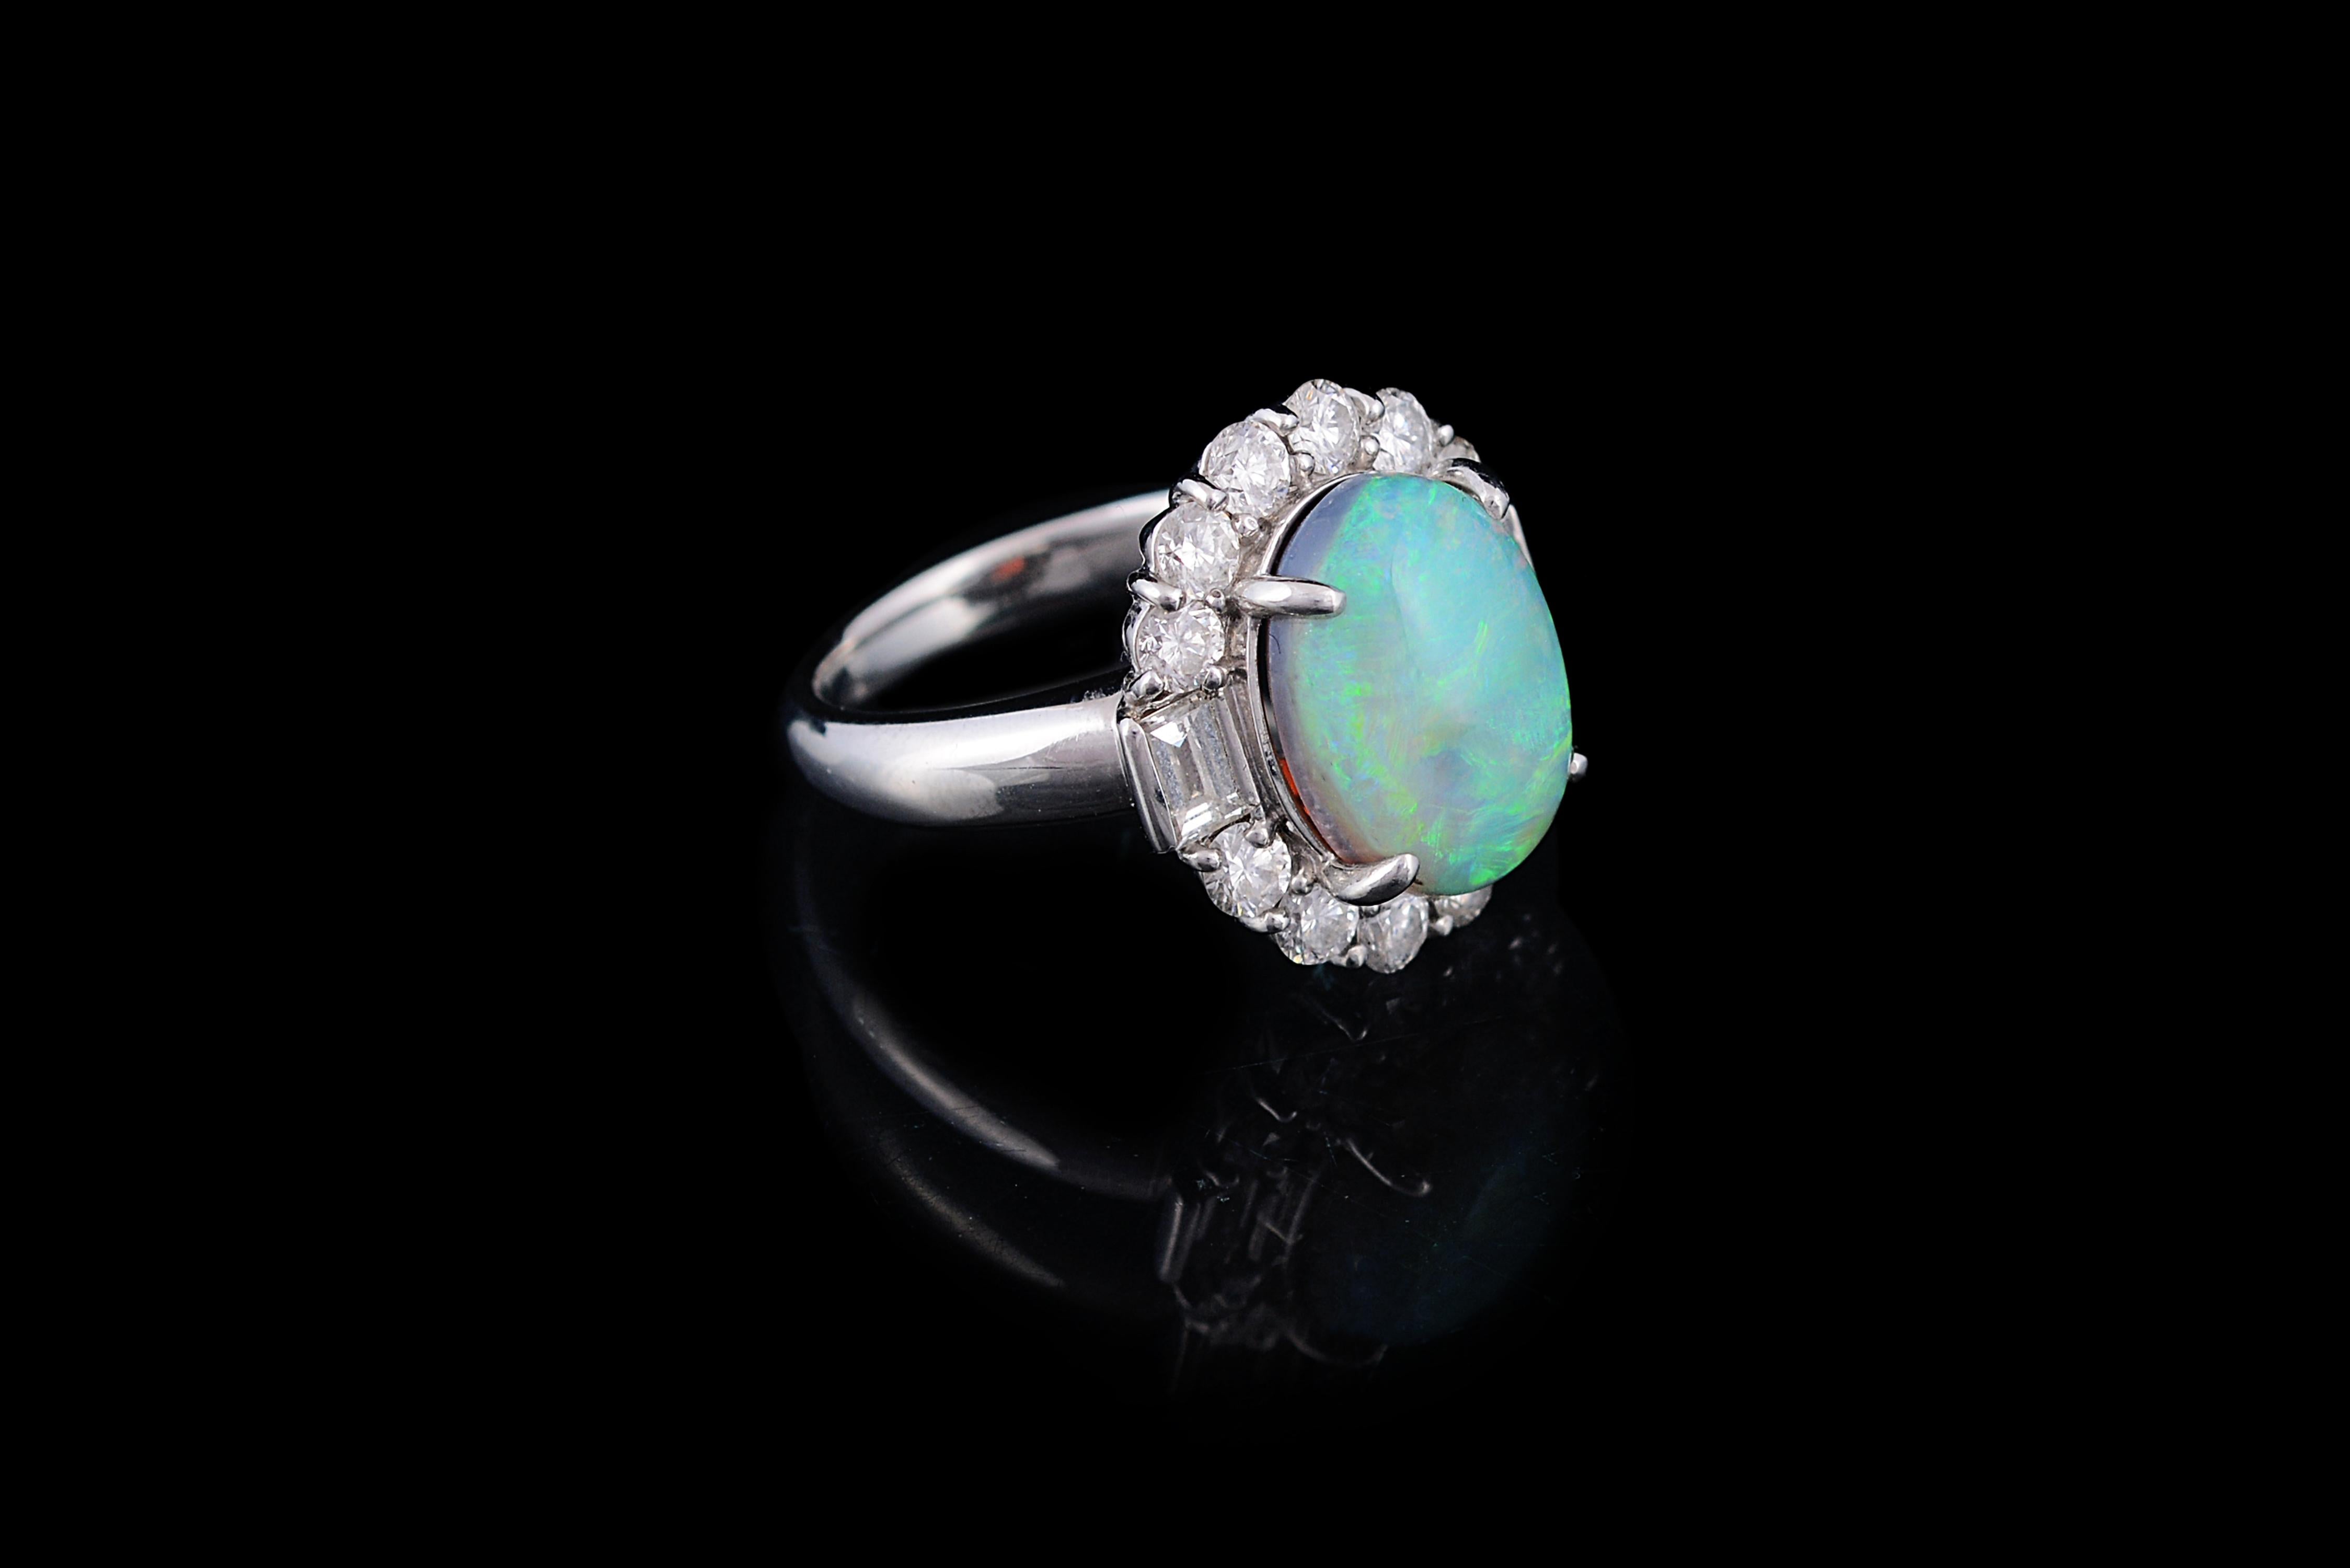 For those who would like to be different, a very beautiful Australian opal and diamonds engagement ring. The gorgeous opal, weighs 4.49 carats, and has a gorgeous blue, green play of colour. The weight of the diamonds is 1.37 carats. The ring is